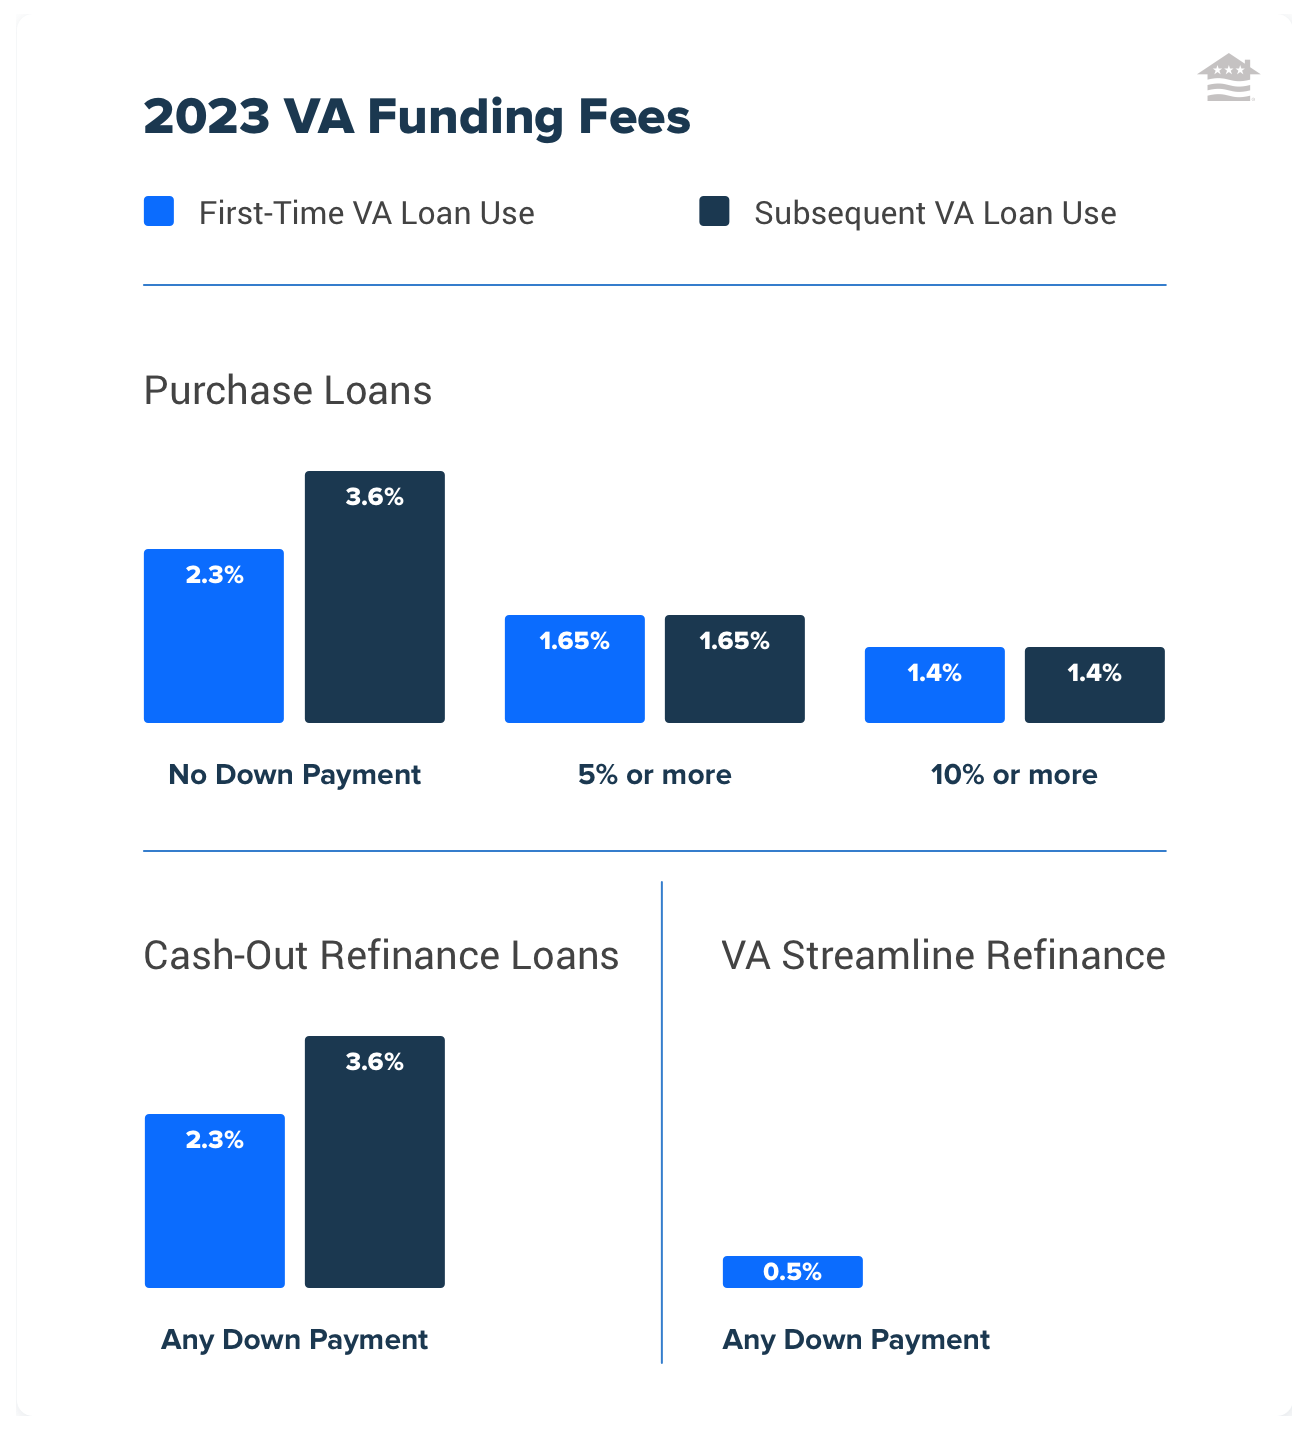 A chart showing 2023 VA funding fee amounts for first time and subsequent VA loan use. 